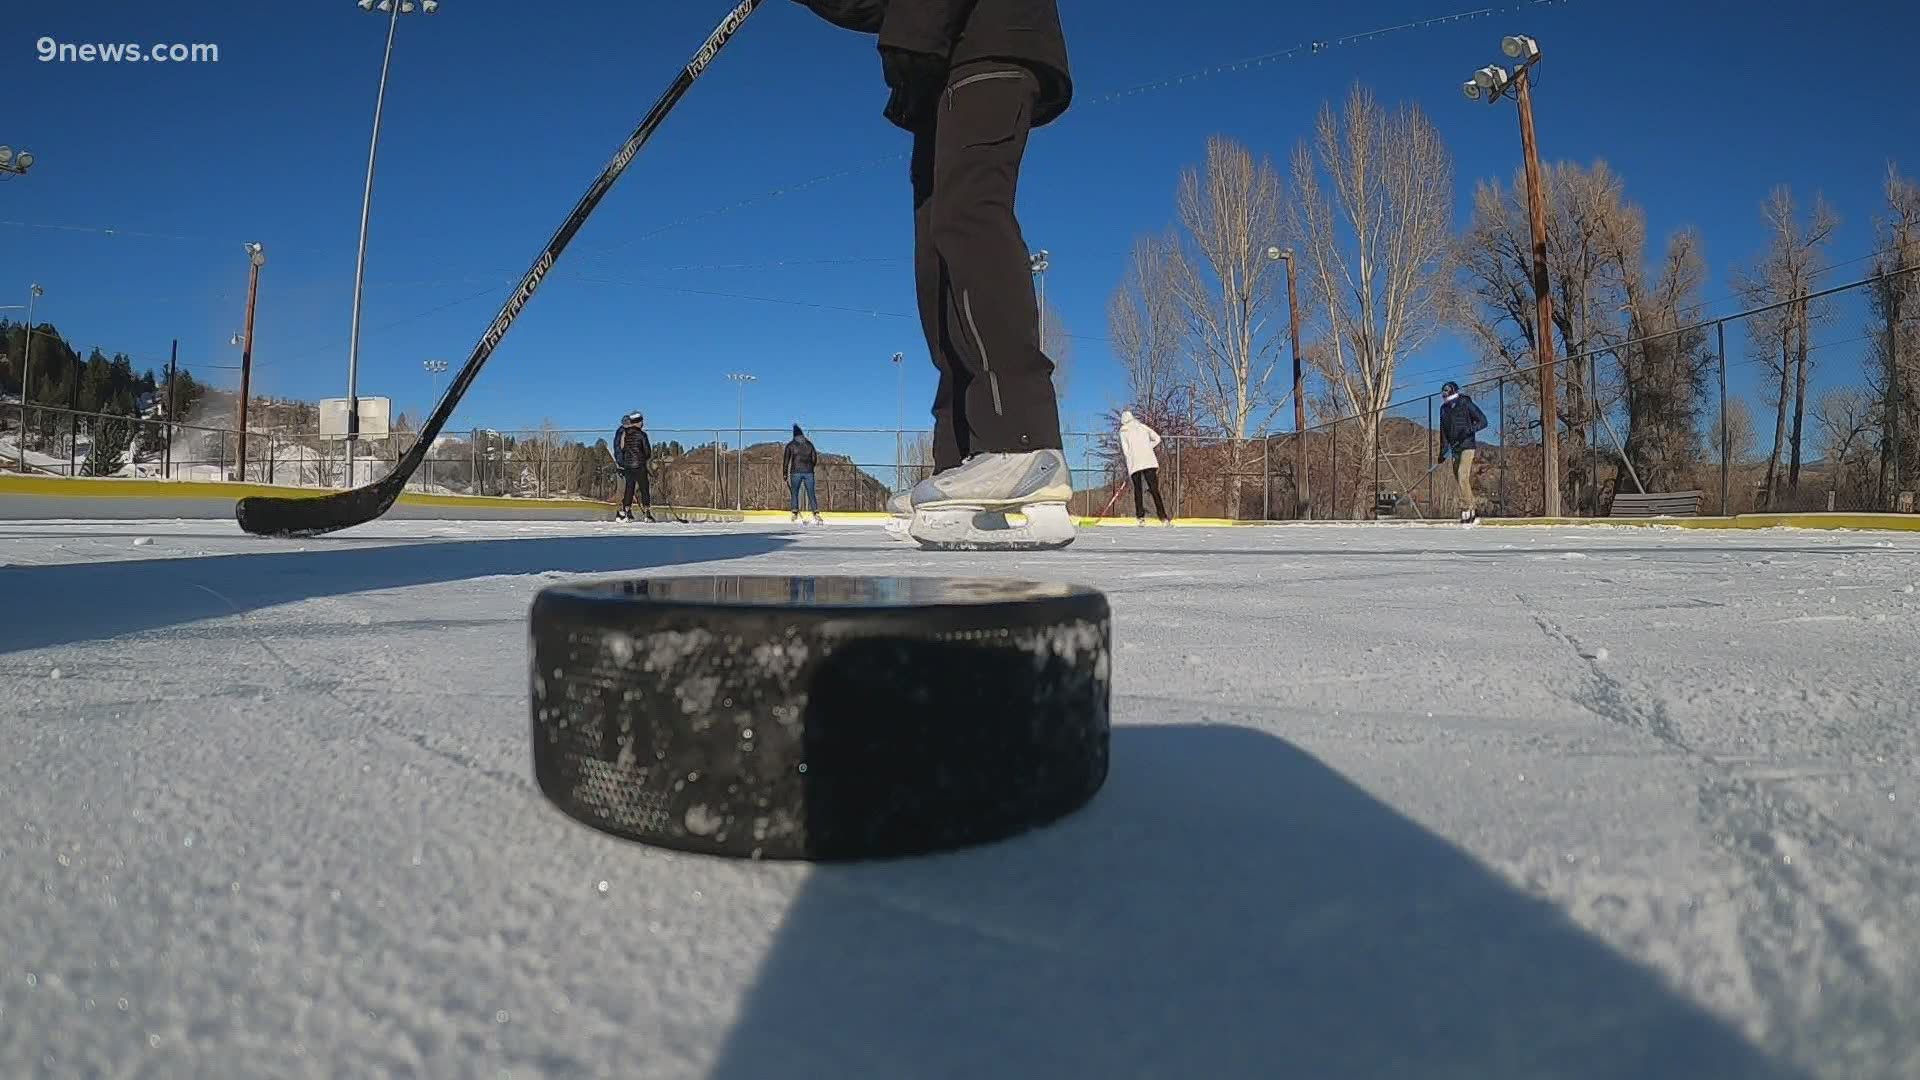 An outdoor tennis court in Steamboat Springs has been turned into an outdoor ice rink where people can skate under the lights for free.